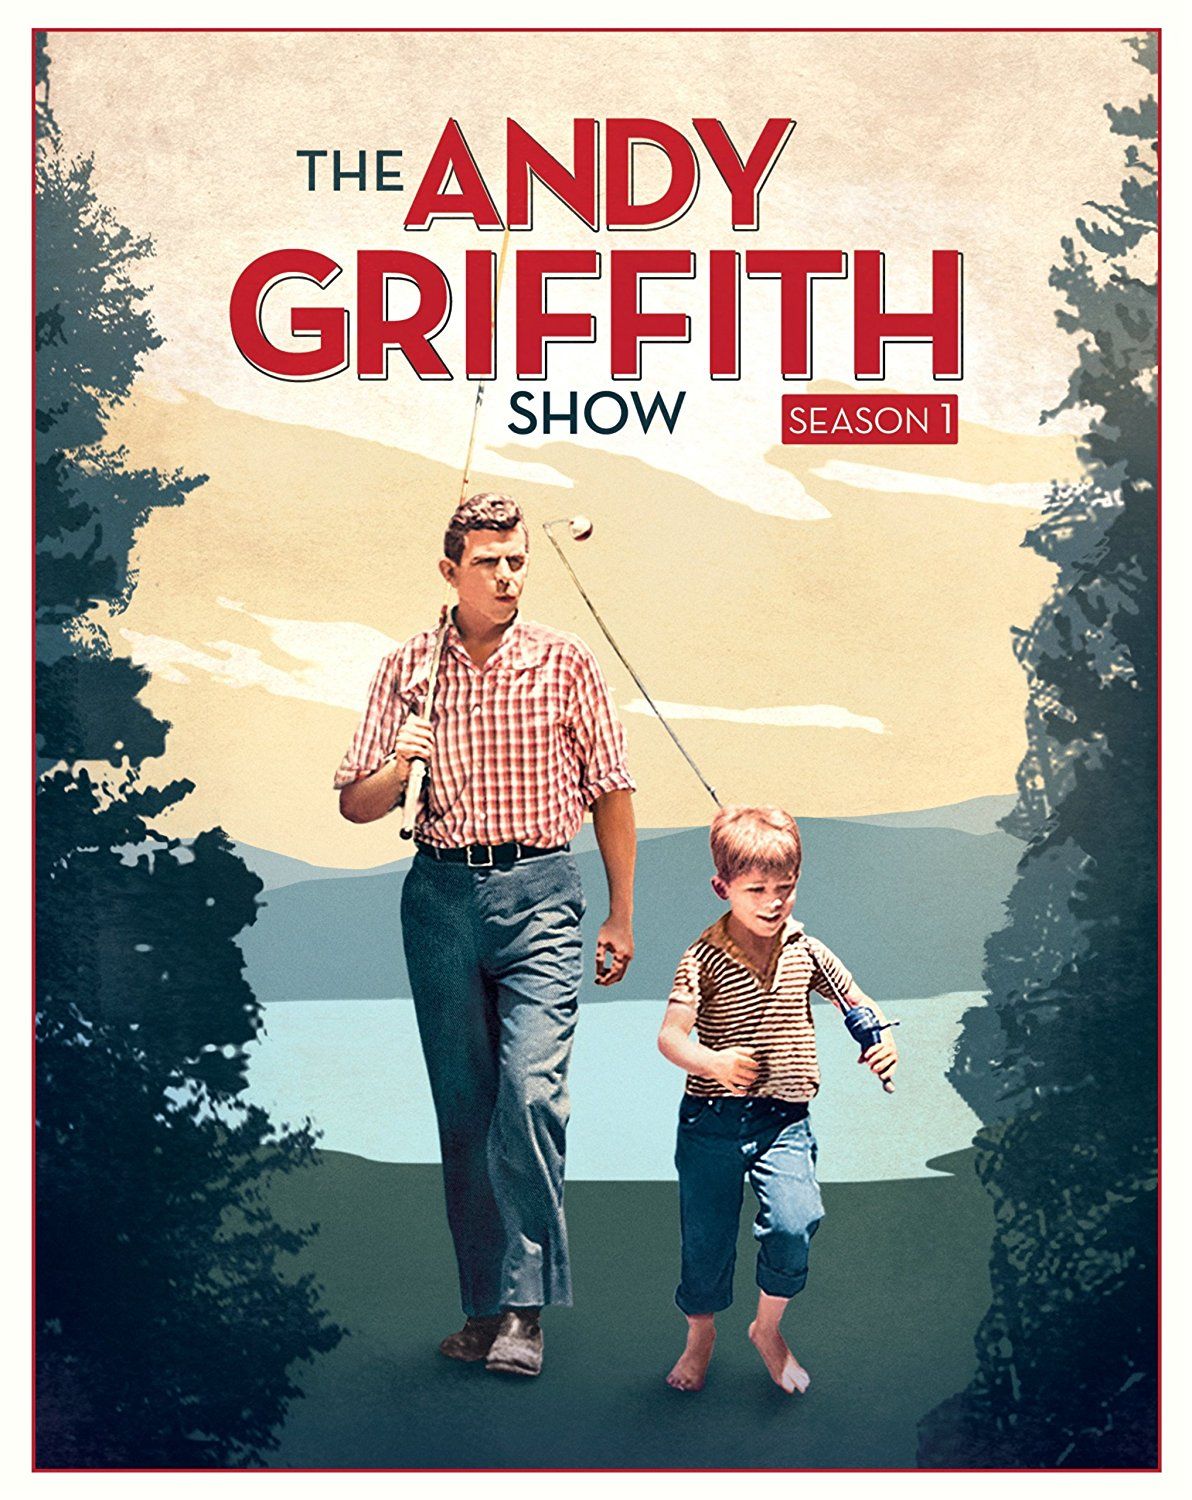 Poster for the "Andy Griffith Show" | Source: Shutterstock